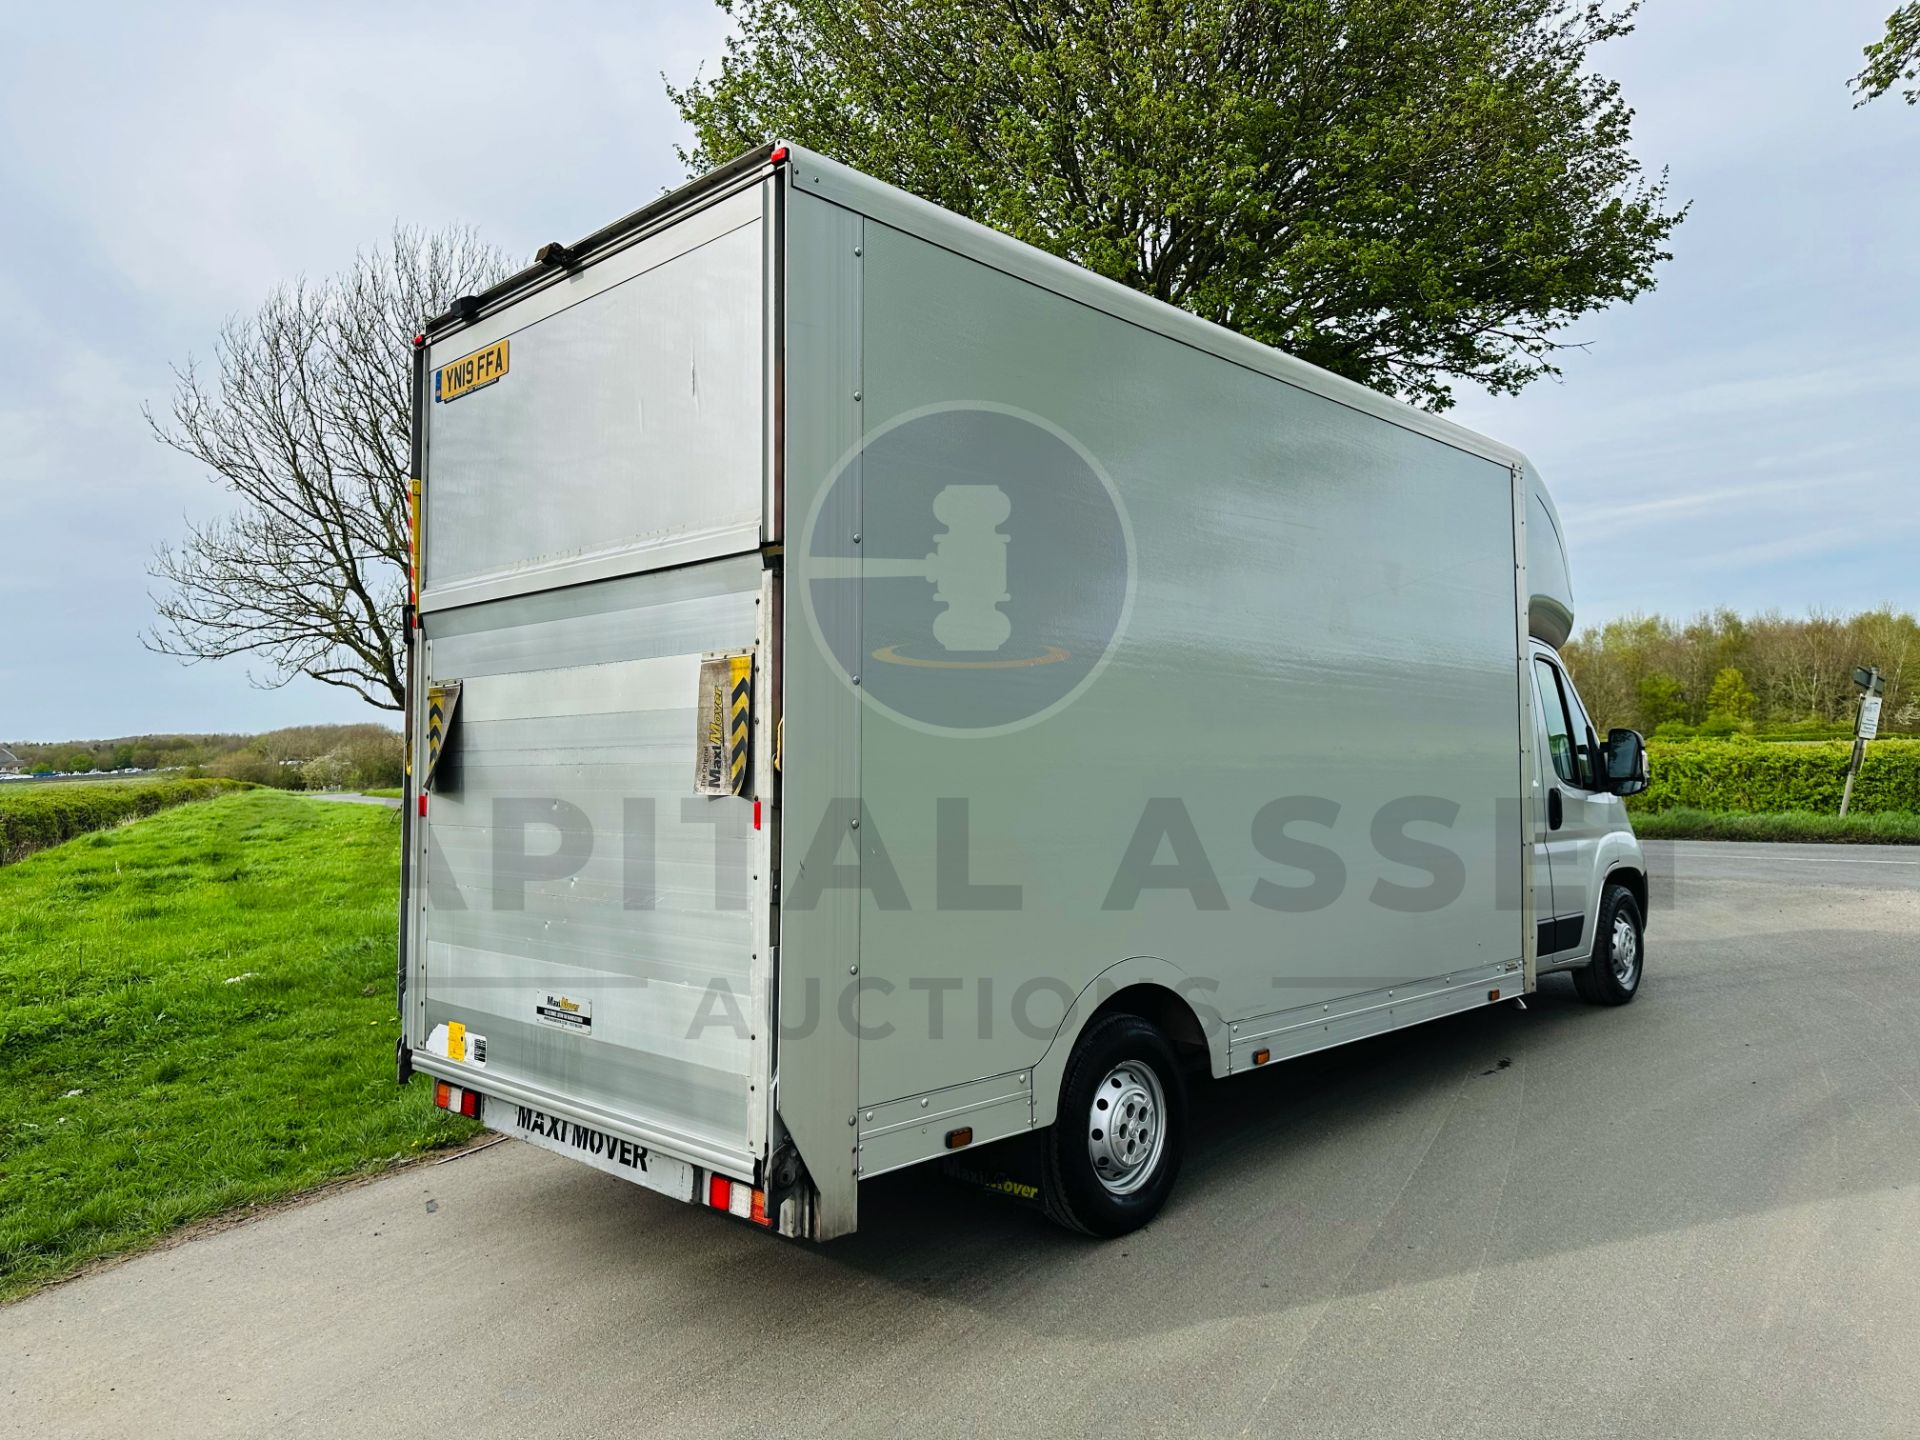 PEUGEOT BOXER 335 *LWB - LOW LOADER / MAXI MOVER LUTON* (2019 - EURO 6) 2.0 BLUE HDI - 6 SPEED *A/C* - Image 10 of 27